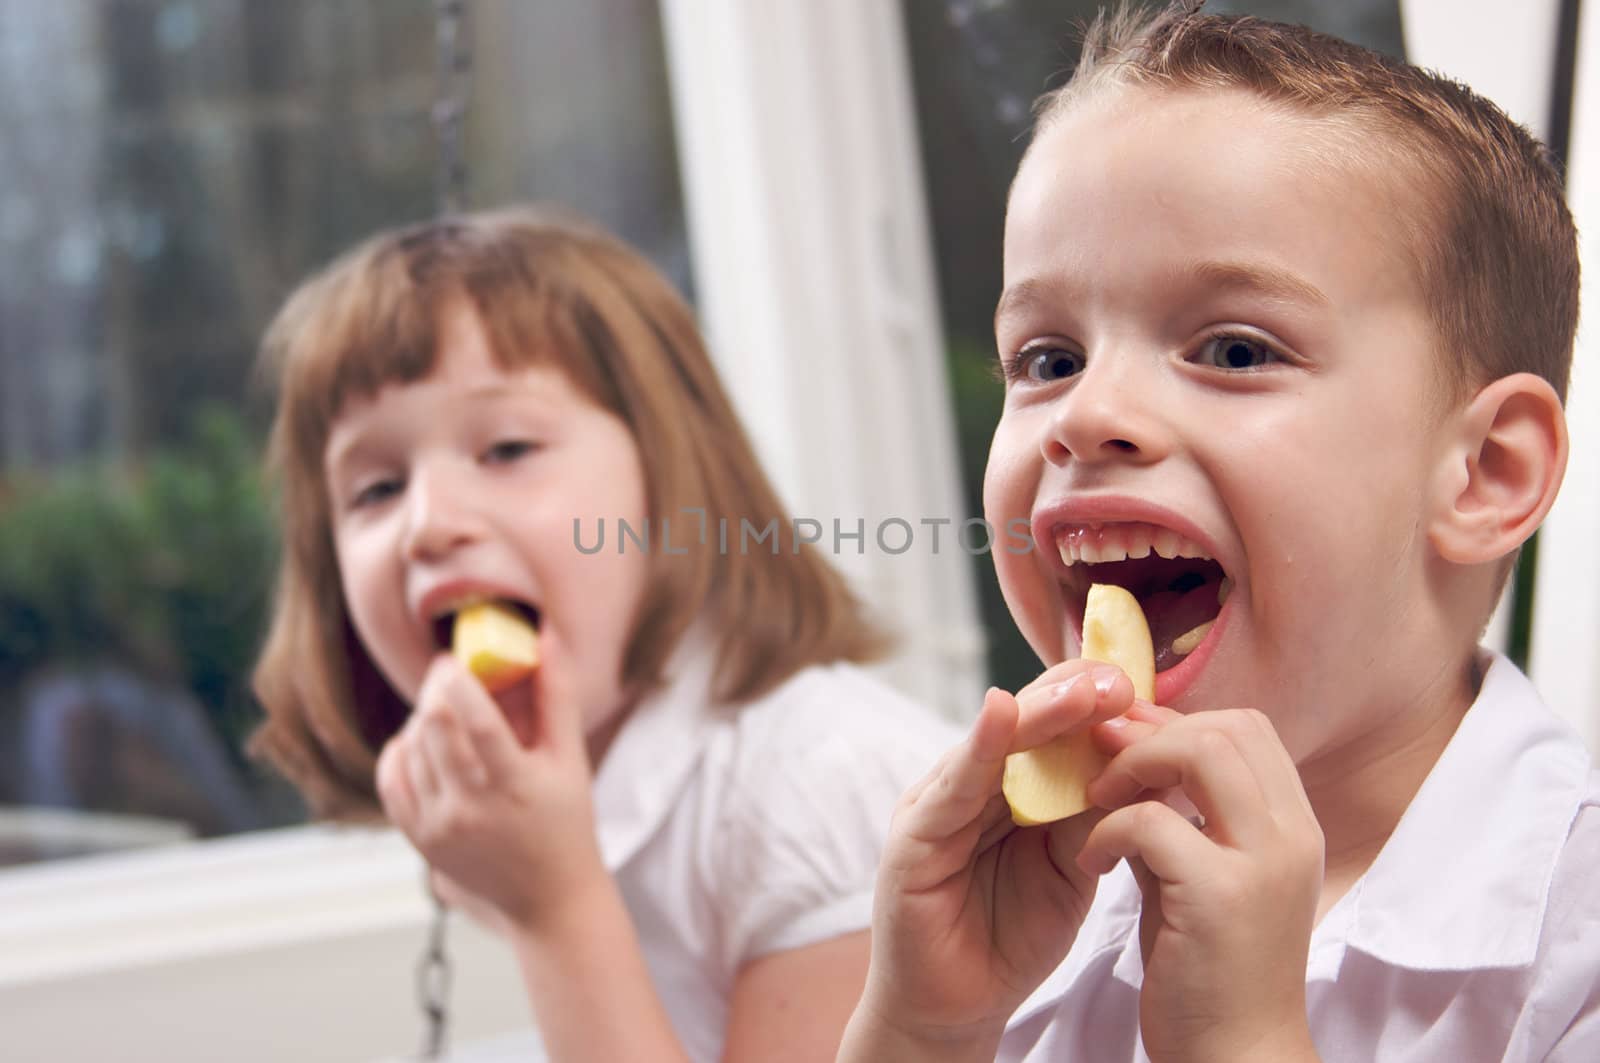 Sister and Brother Eating an Apple by Feverpitched